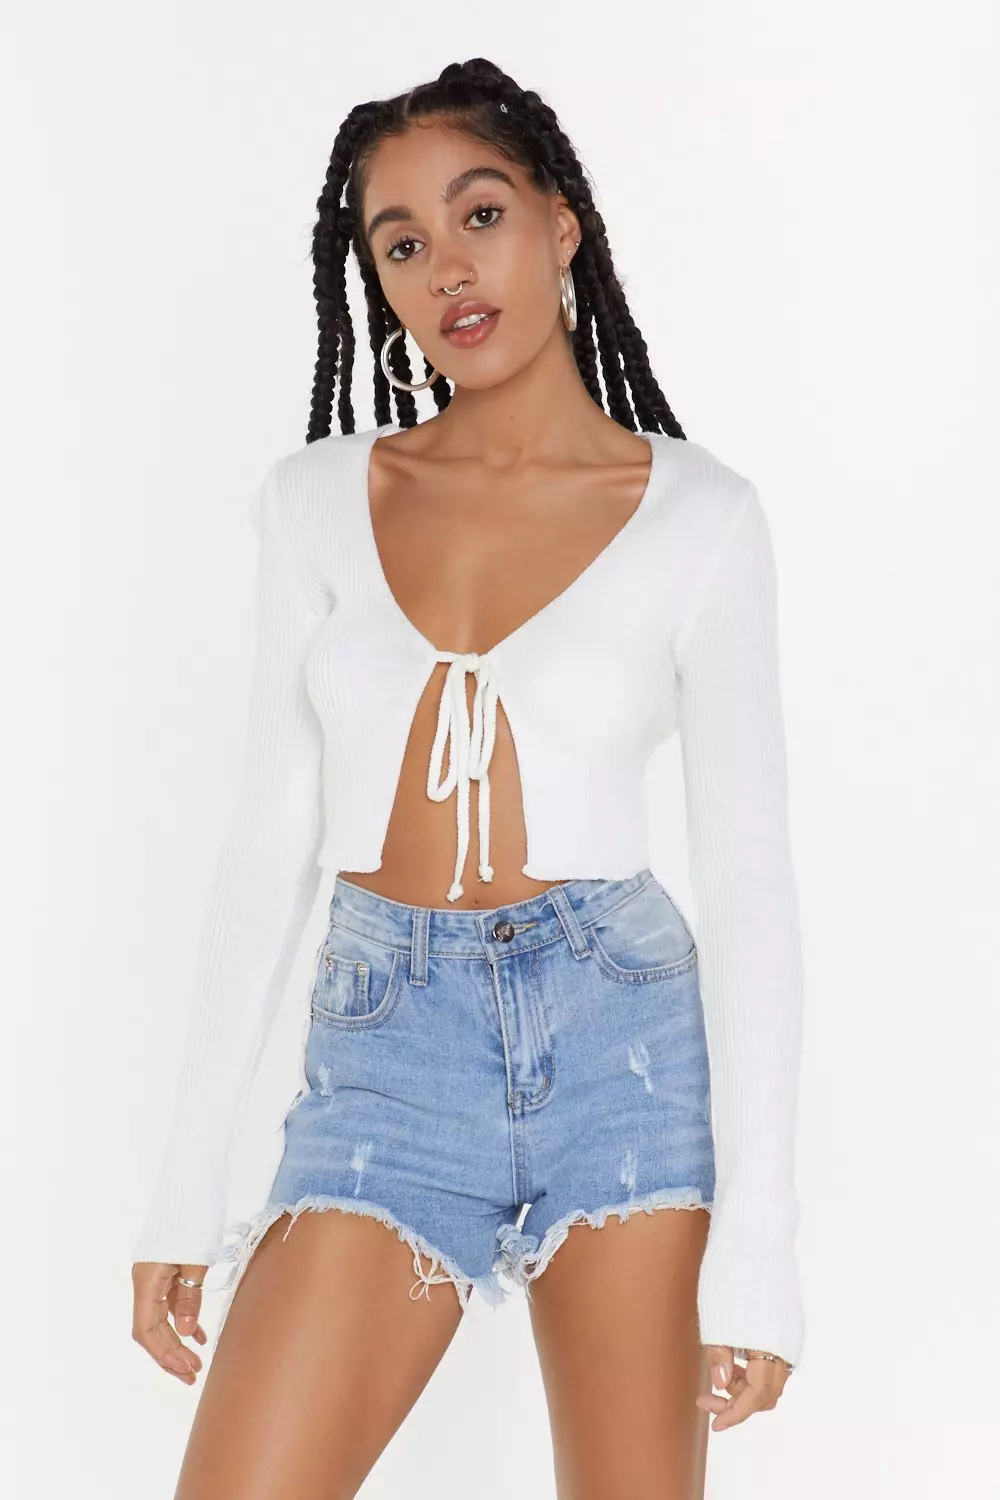 We All Love A Tie R Cropped Cardigan Nasty Gal